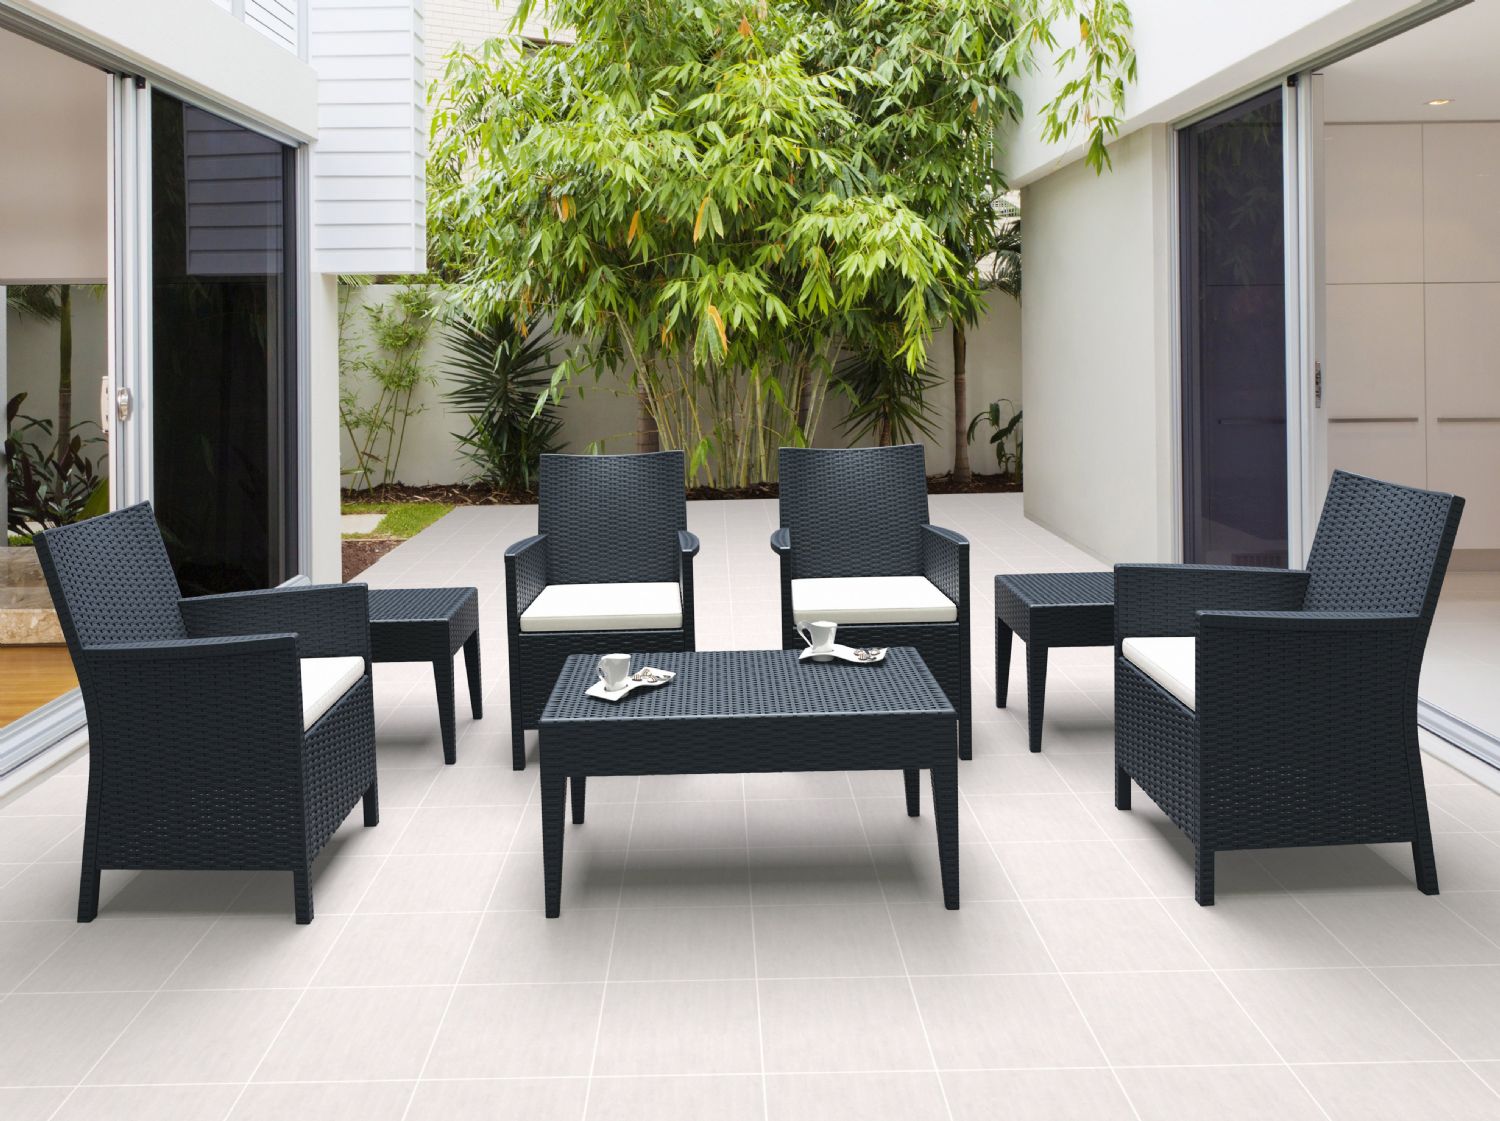 California Wickerlook Resin Patio Seating Set 7 Piece White ISP8062S-WH - 2